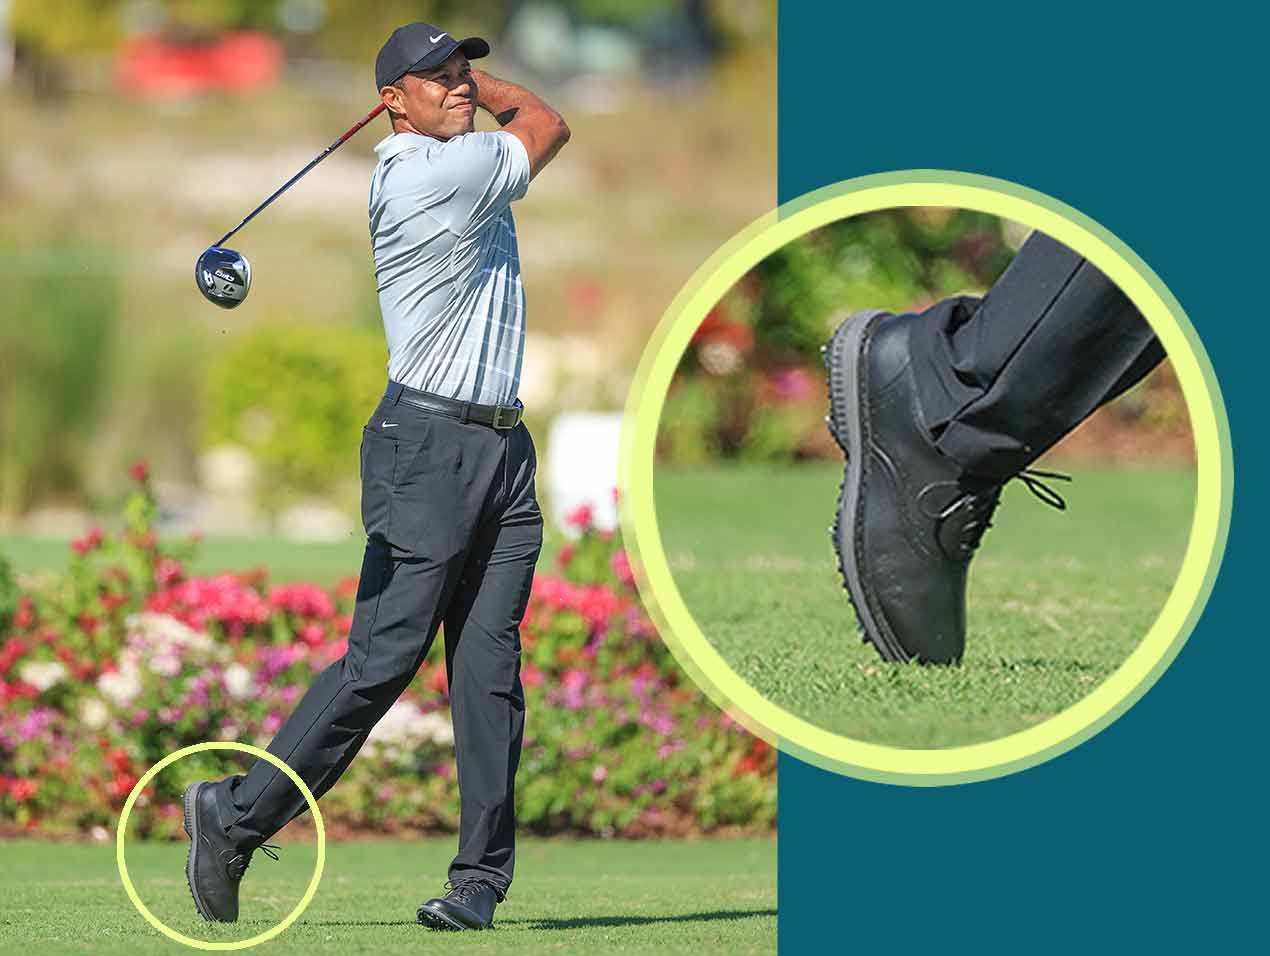 Tiger Woods' cushy shoes and 2 other accessories that caught our eye